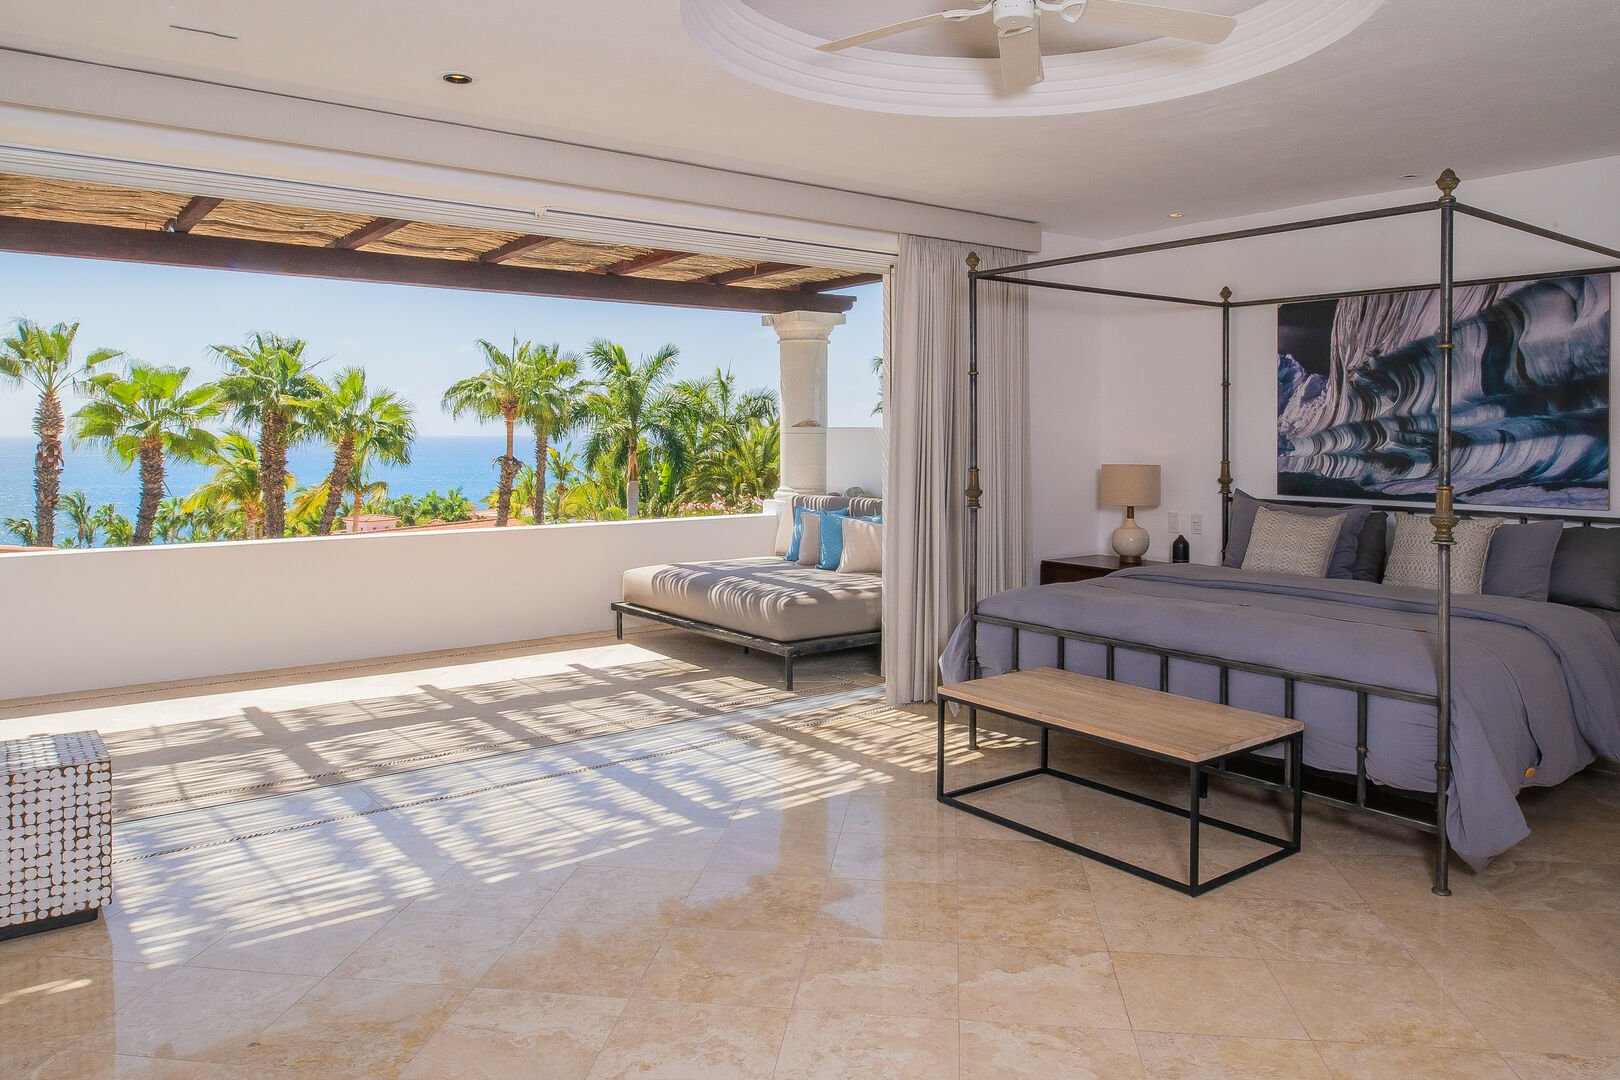 The master bedroom with a view of the ocean from the balcony.